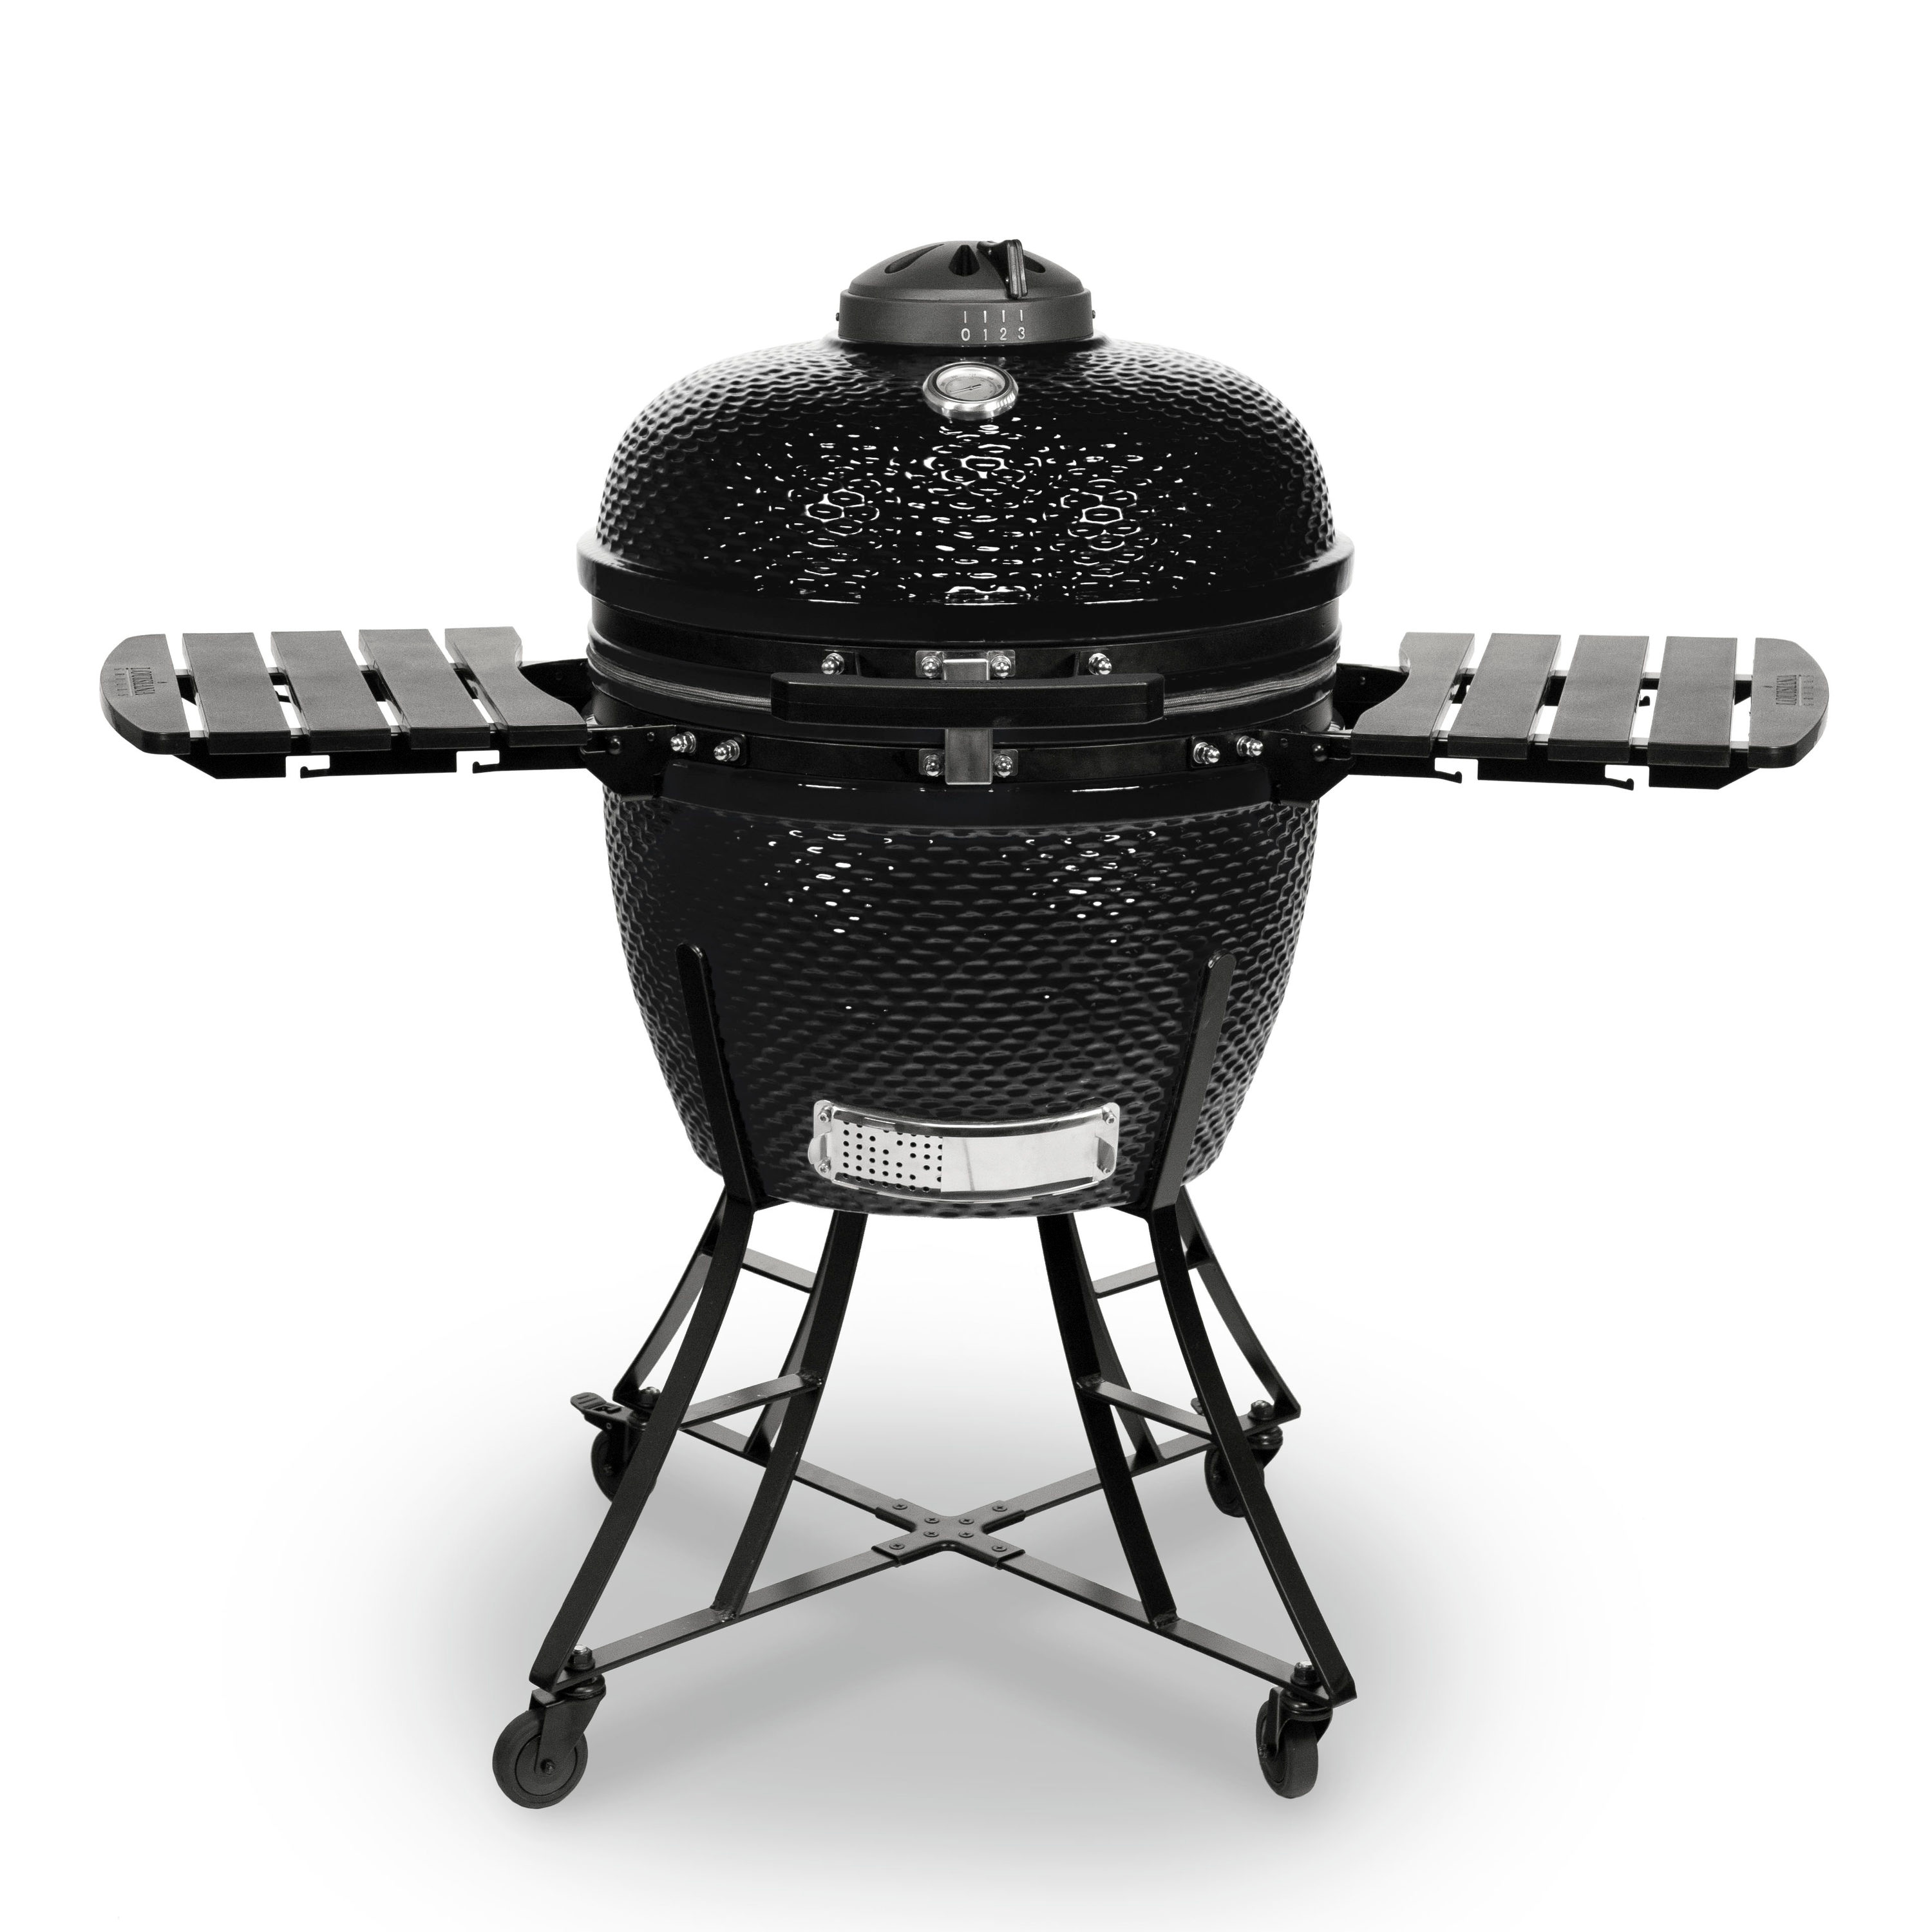 Louisiana Grills W Black Kamado Charcoal Grill in the Charcoal Grills at Lowes.com